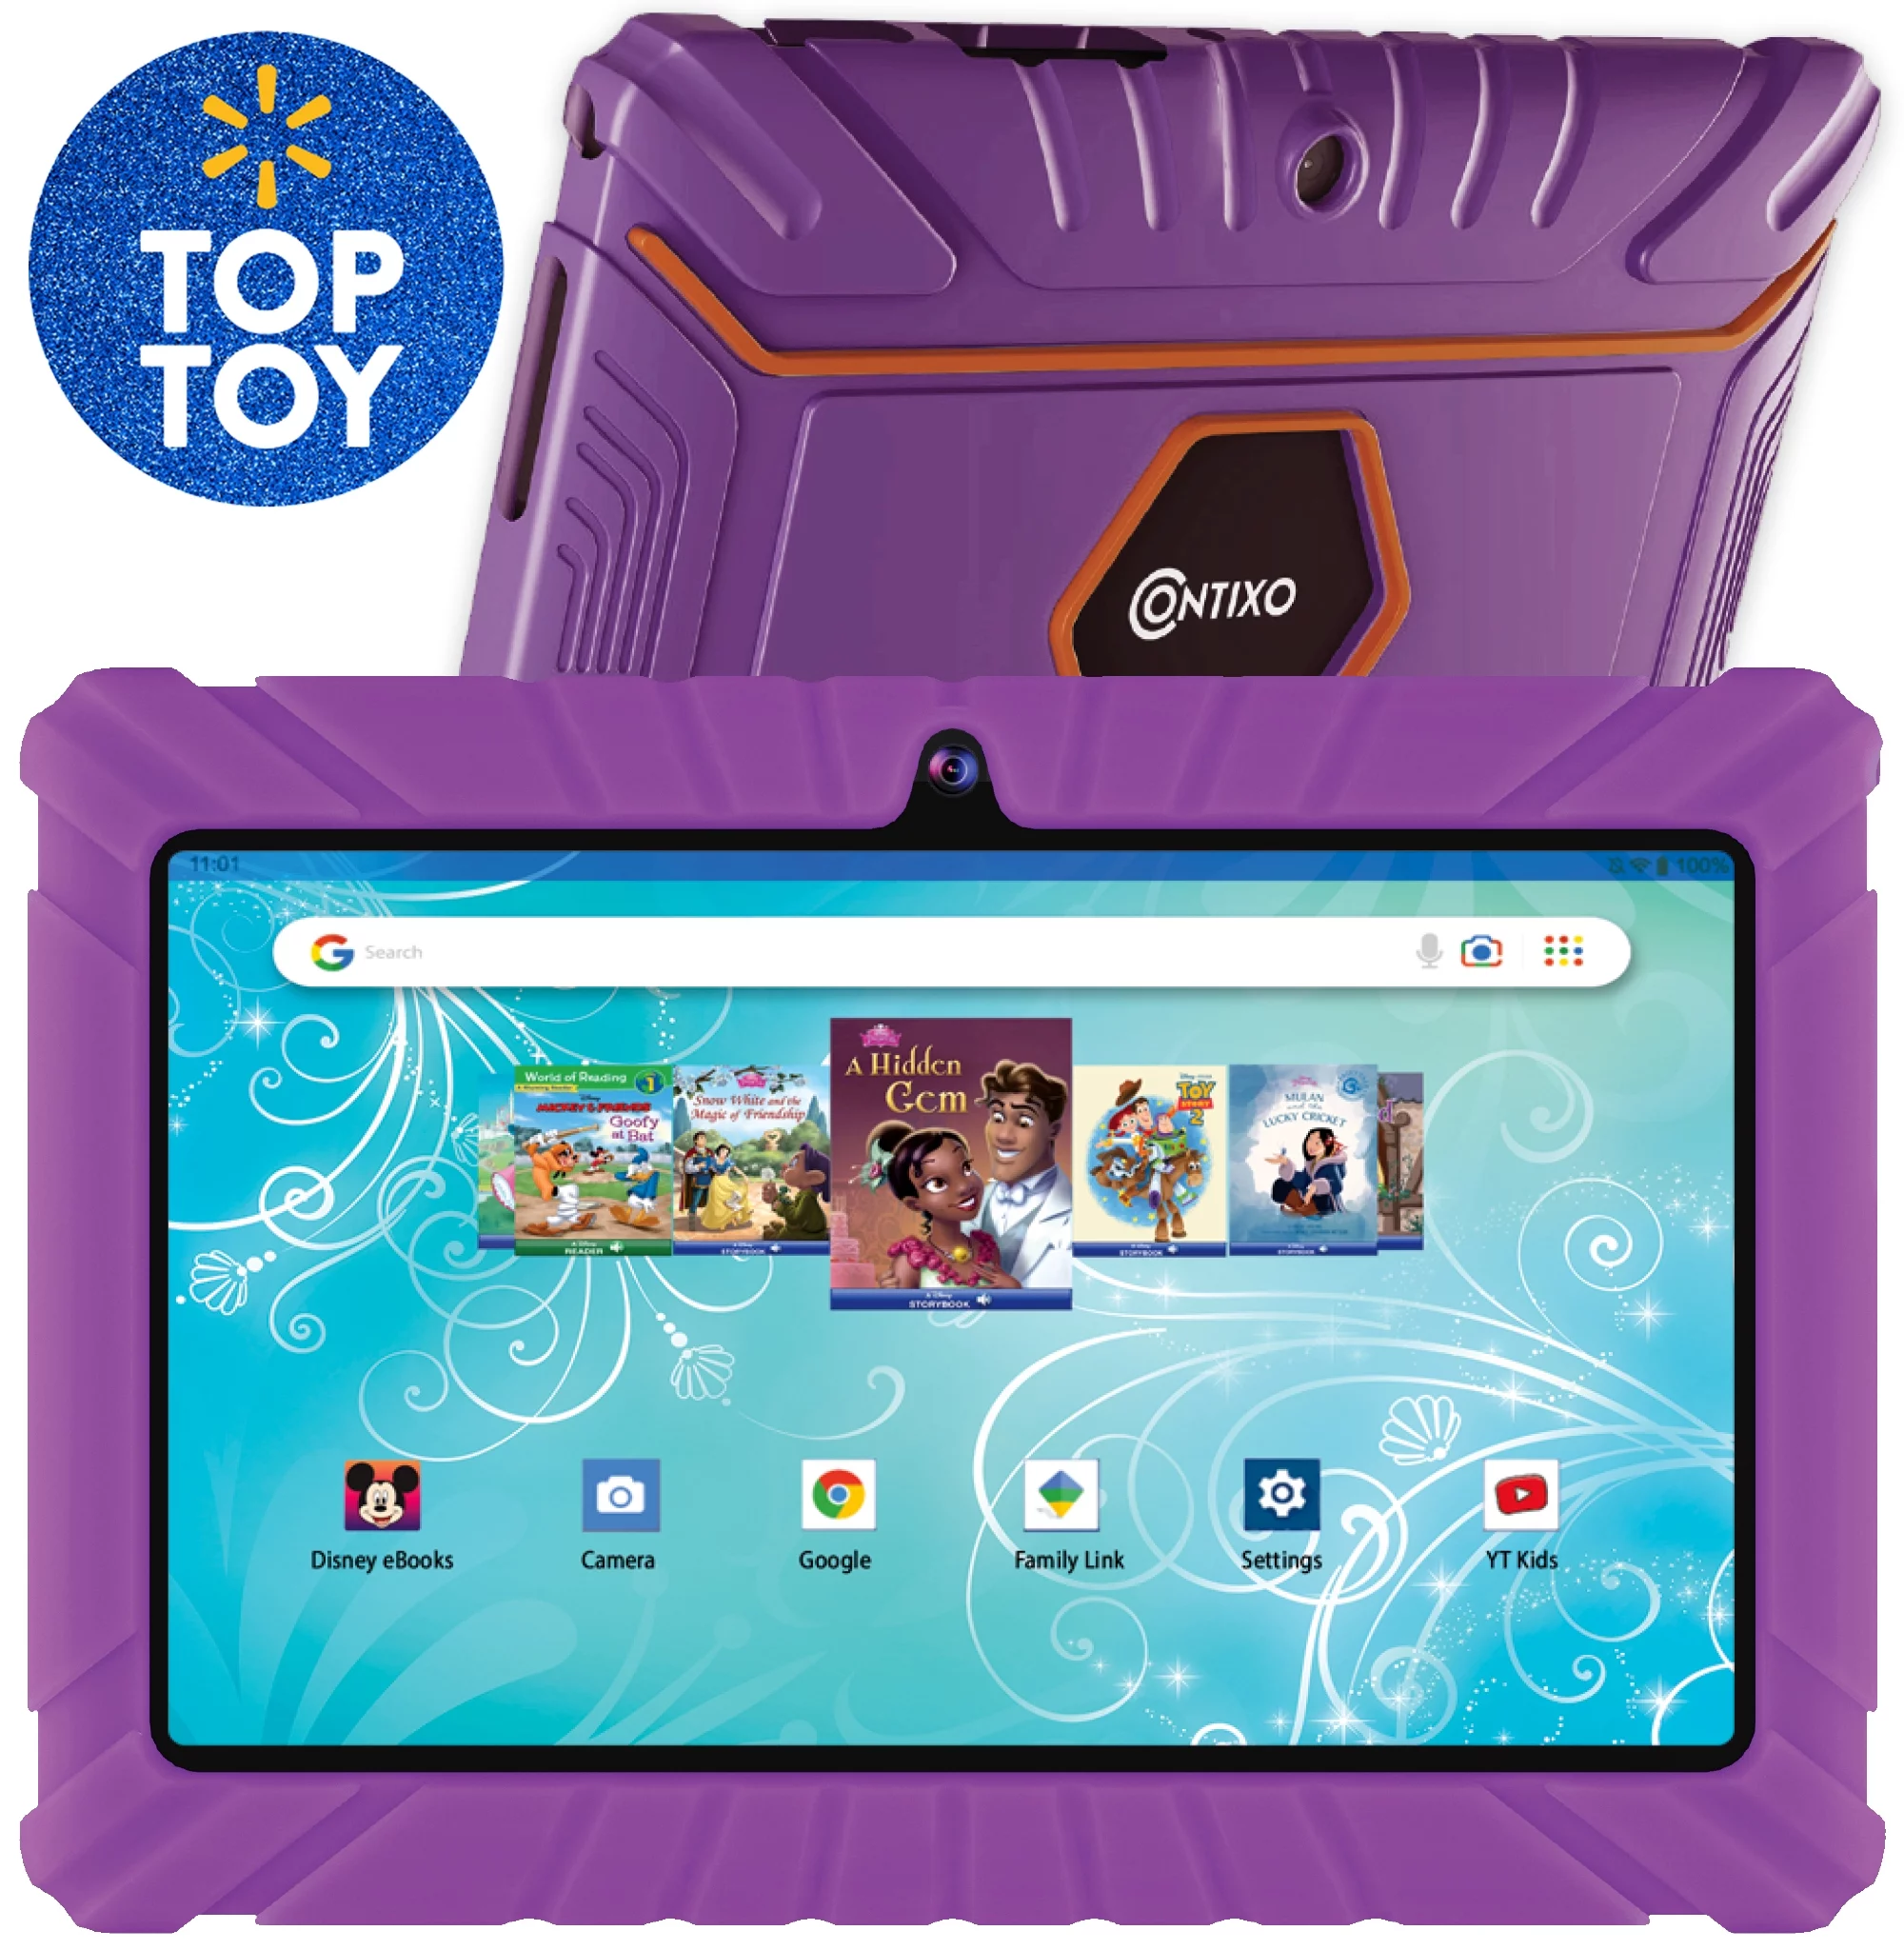 Contixo V8-2 Kids Tablet 32GB, 7" HD Display, Ages 3-7, Includes 50+ Disney E-books, Kid-Proof Case Purple (2023 Release)